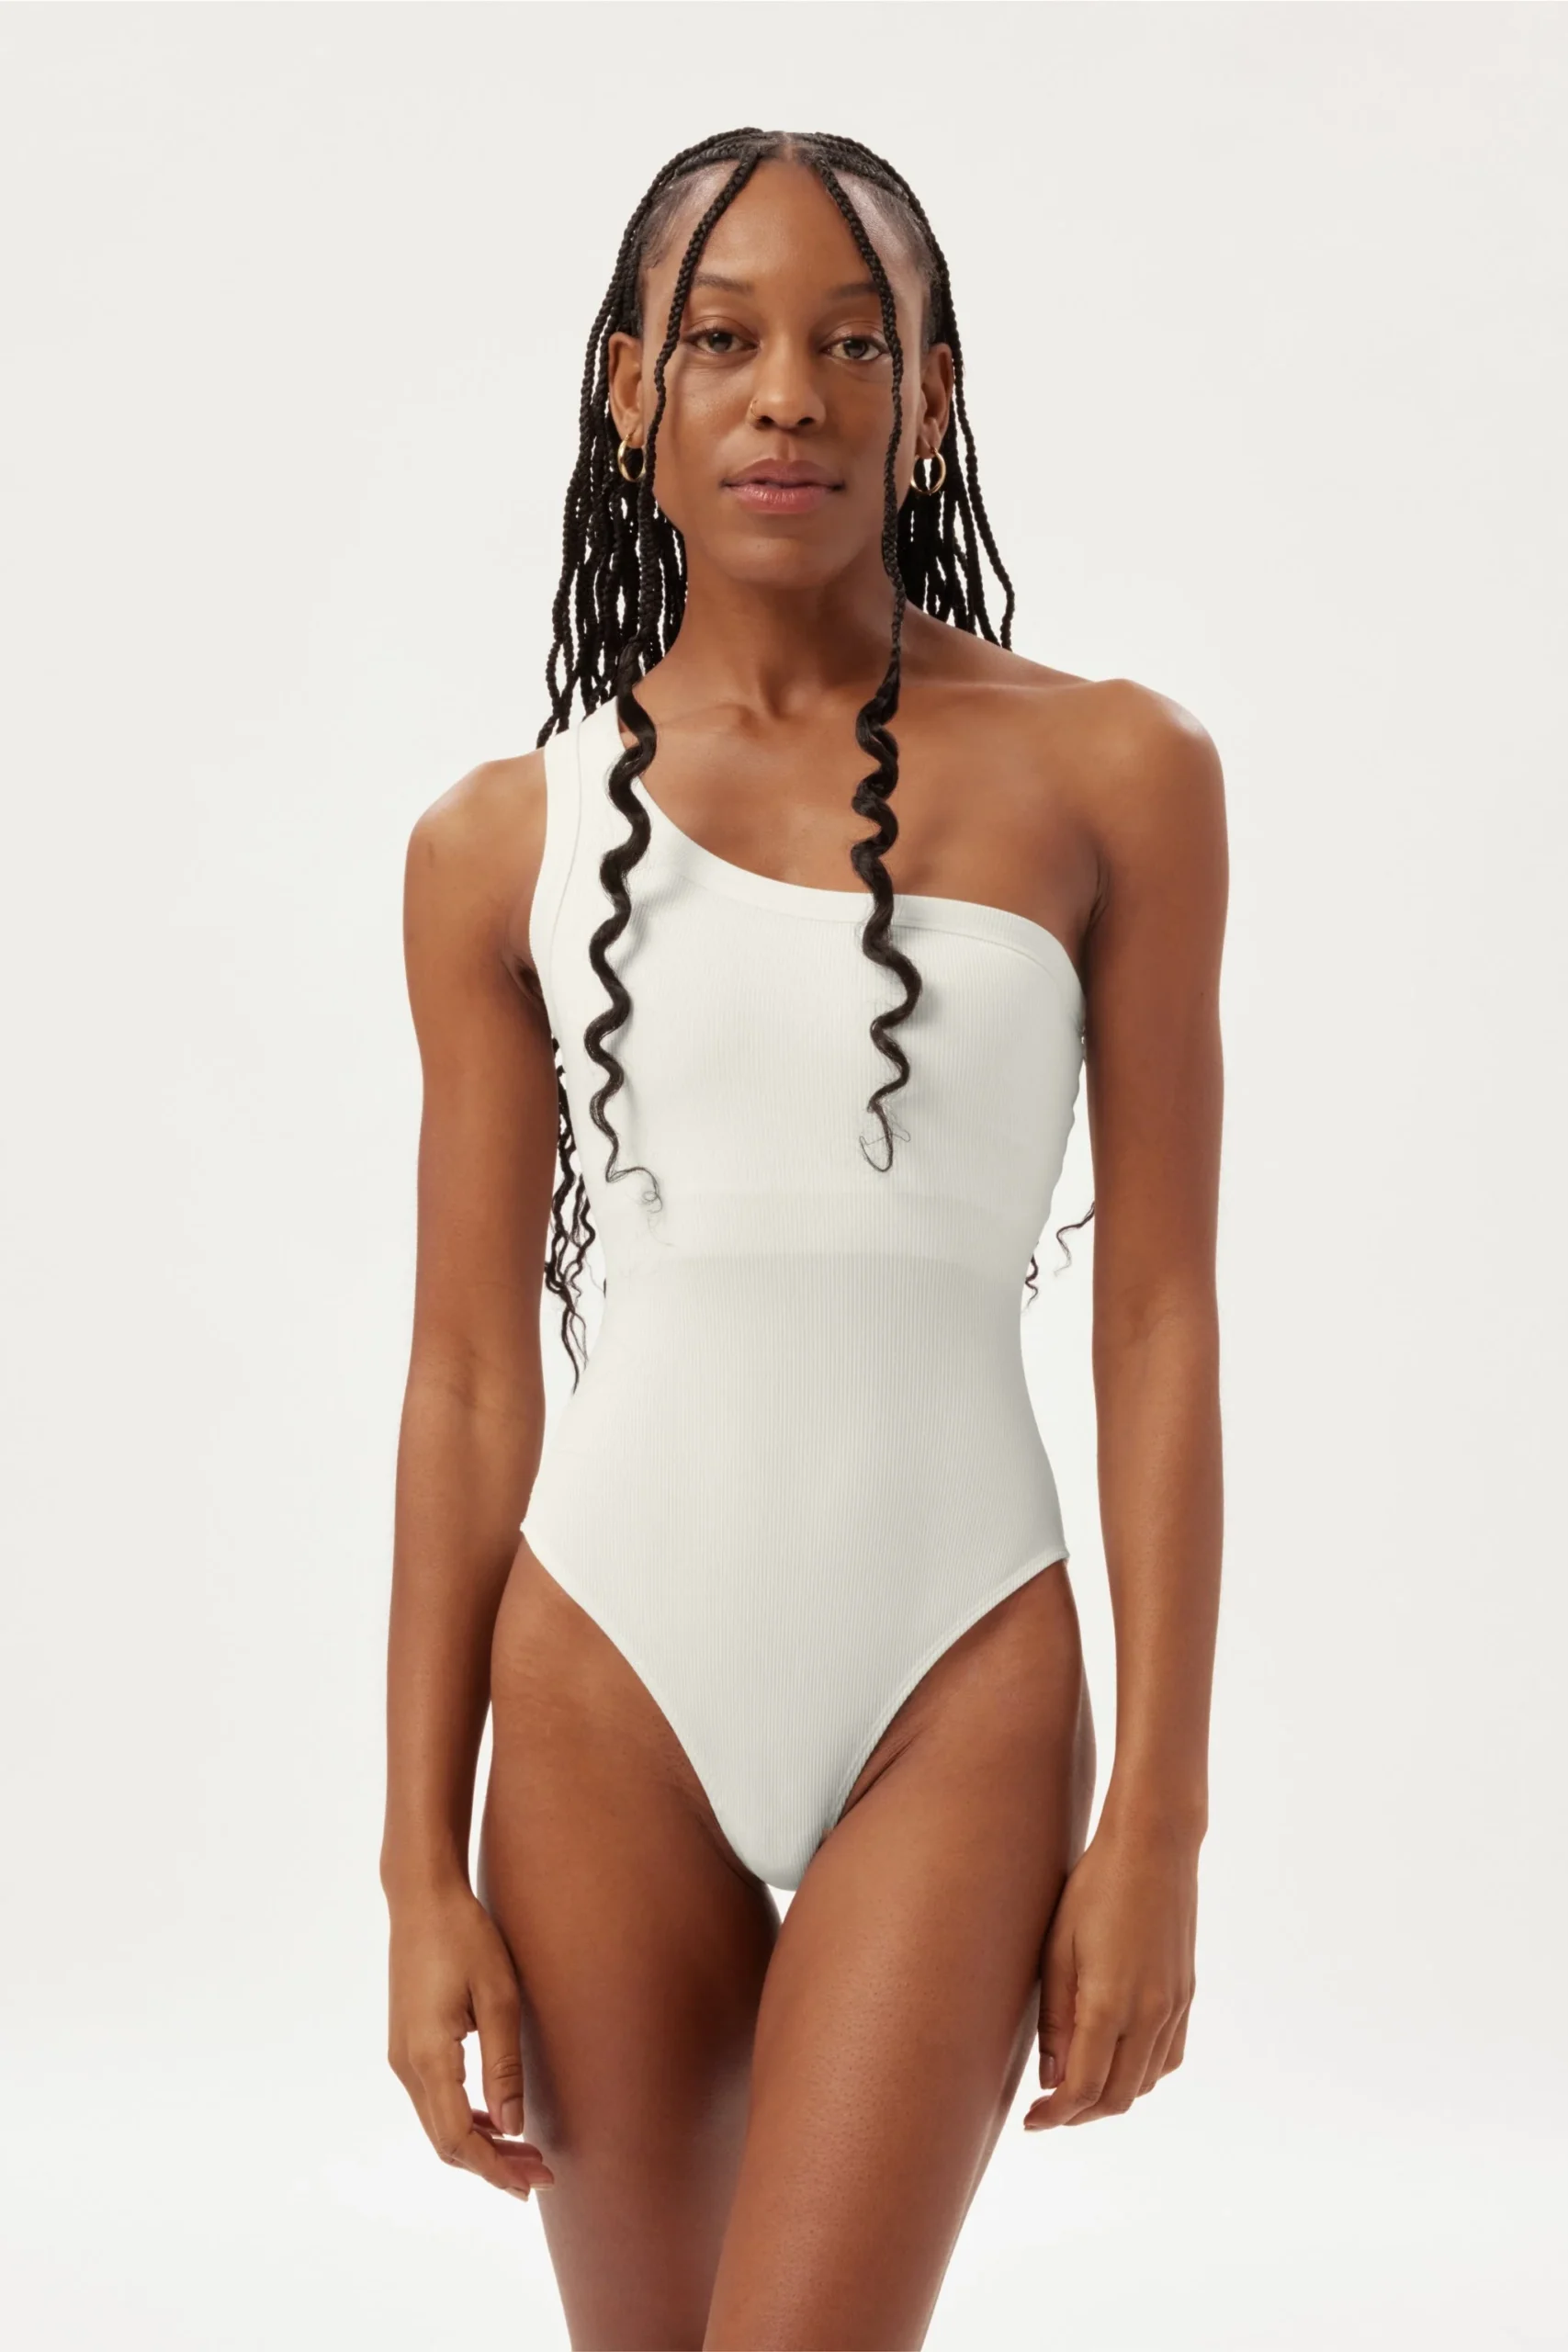 These Bodysuits Have The Support And Lift You Need - 21Ninety